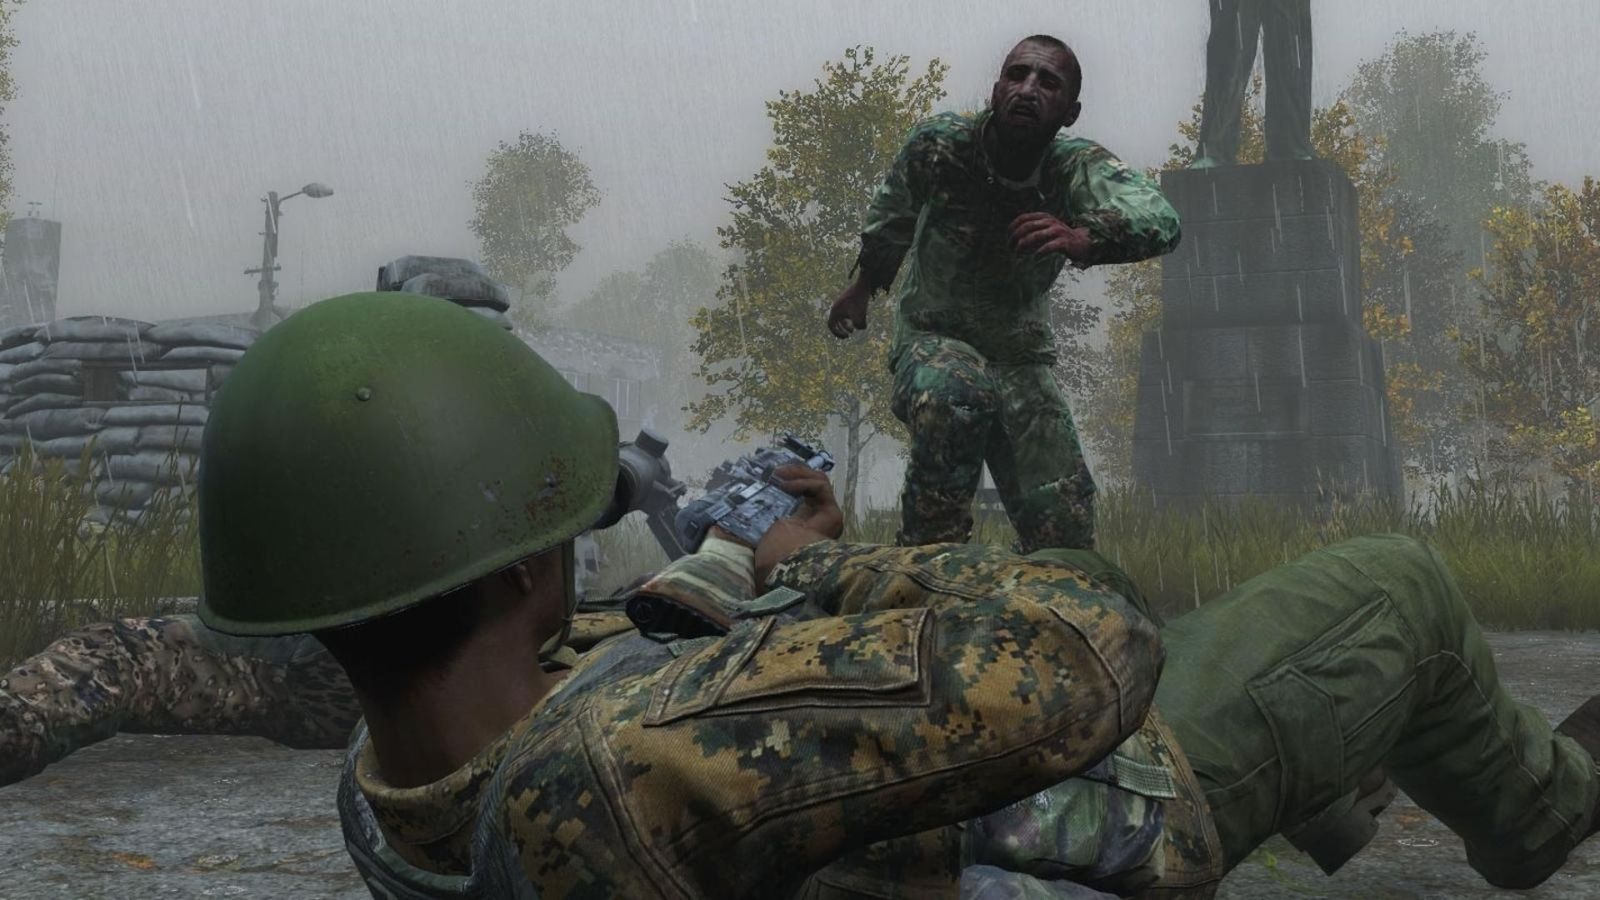 A dayz character attacked by a zombie